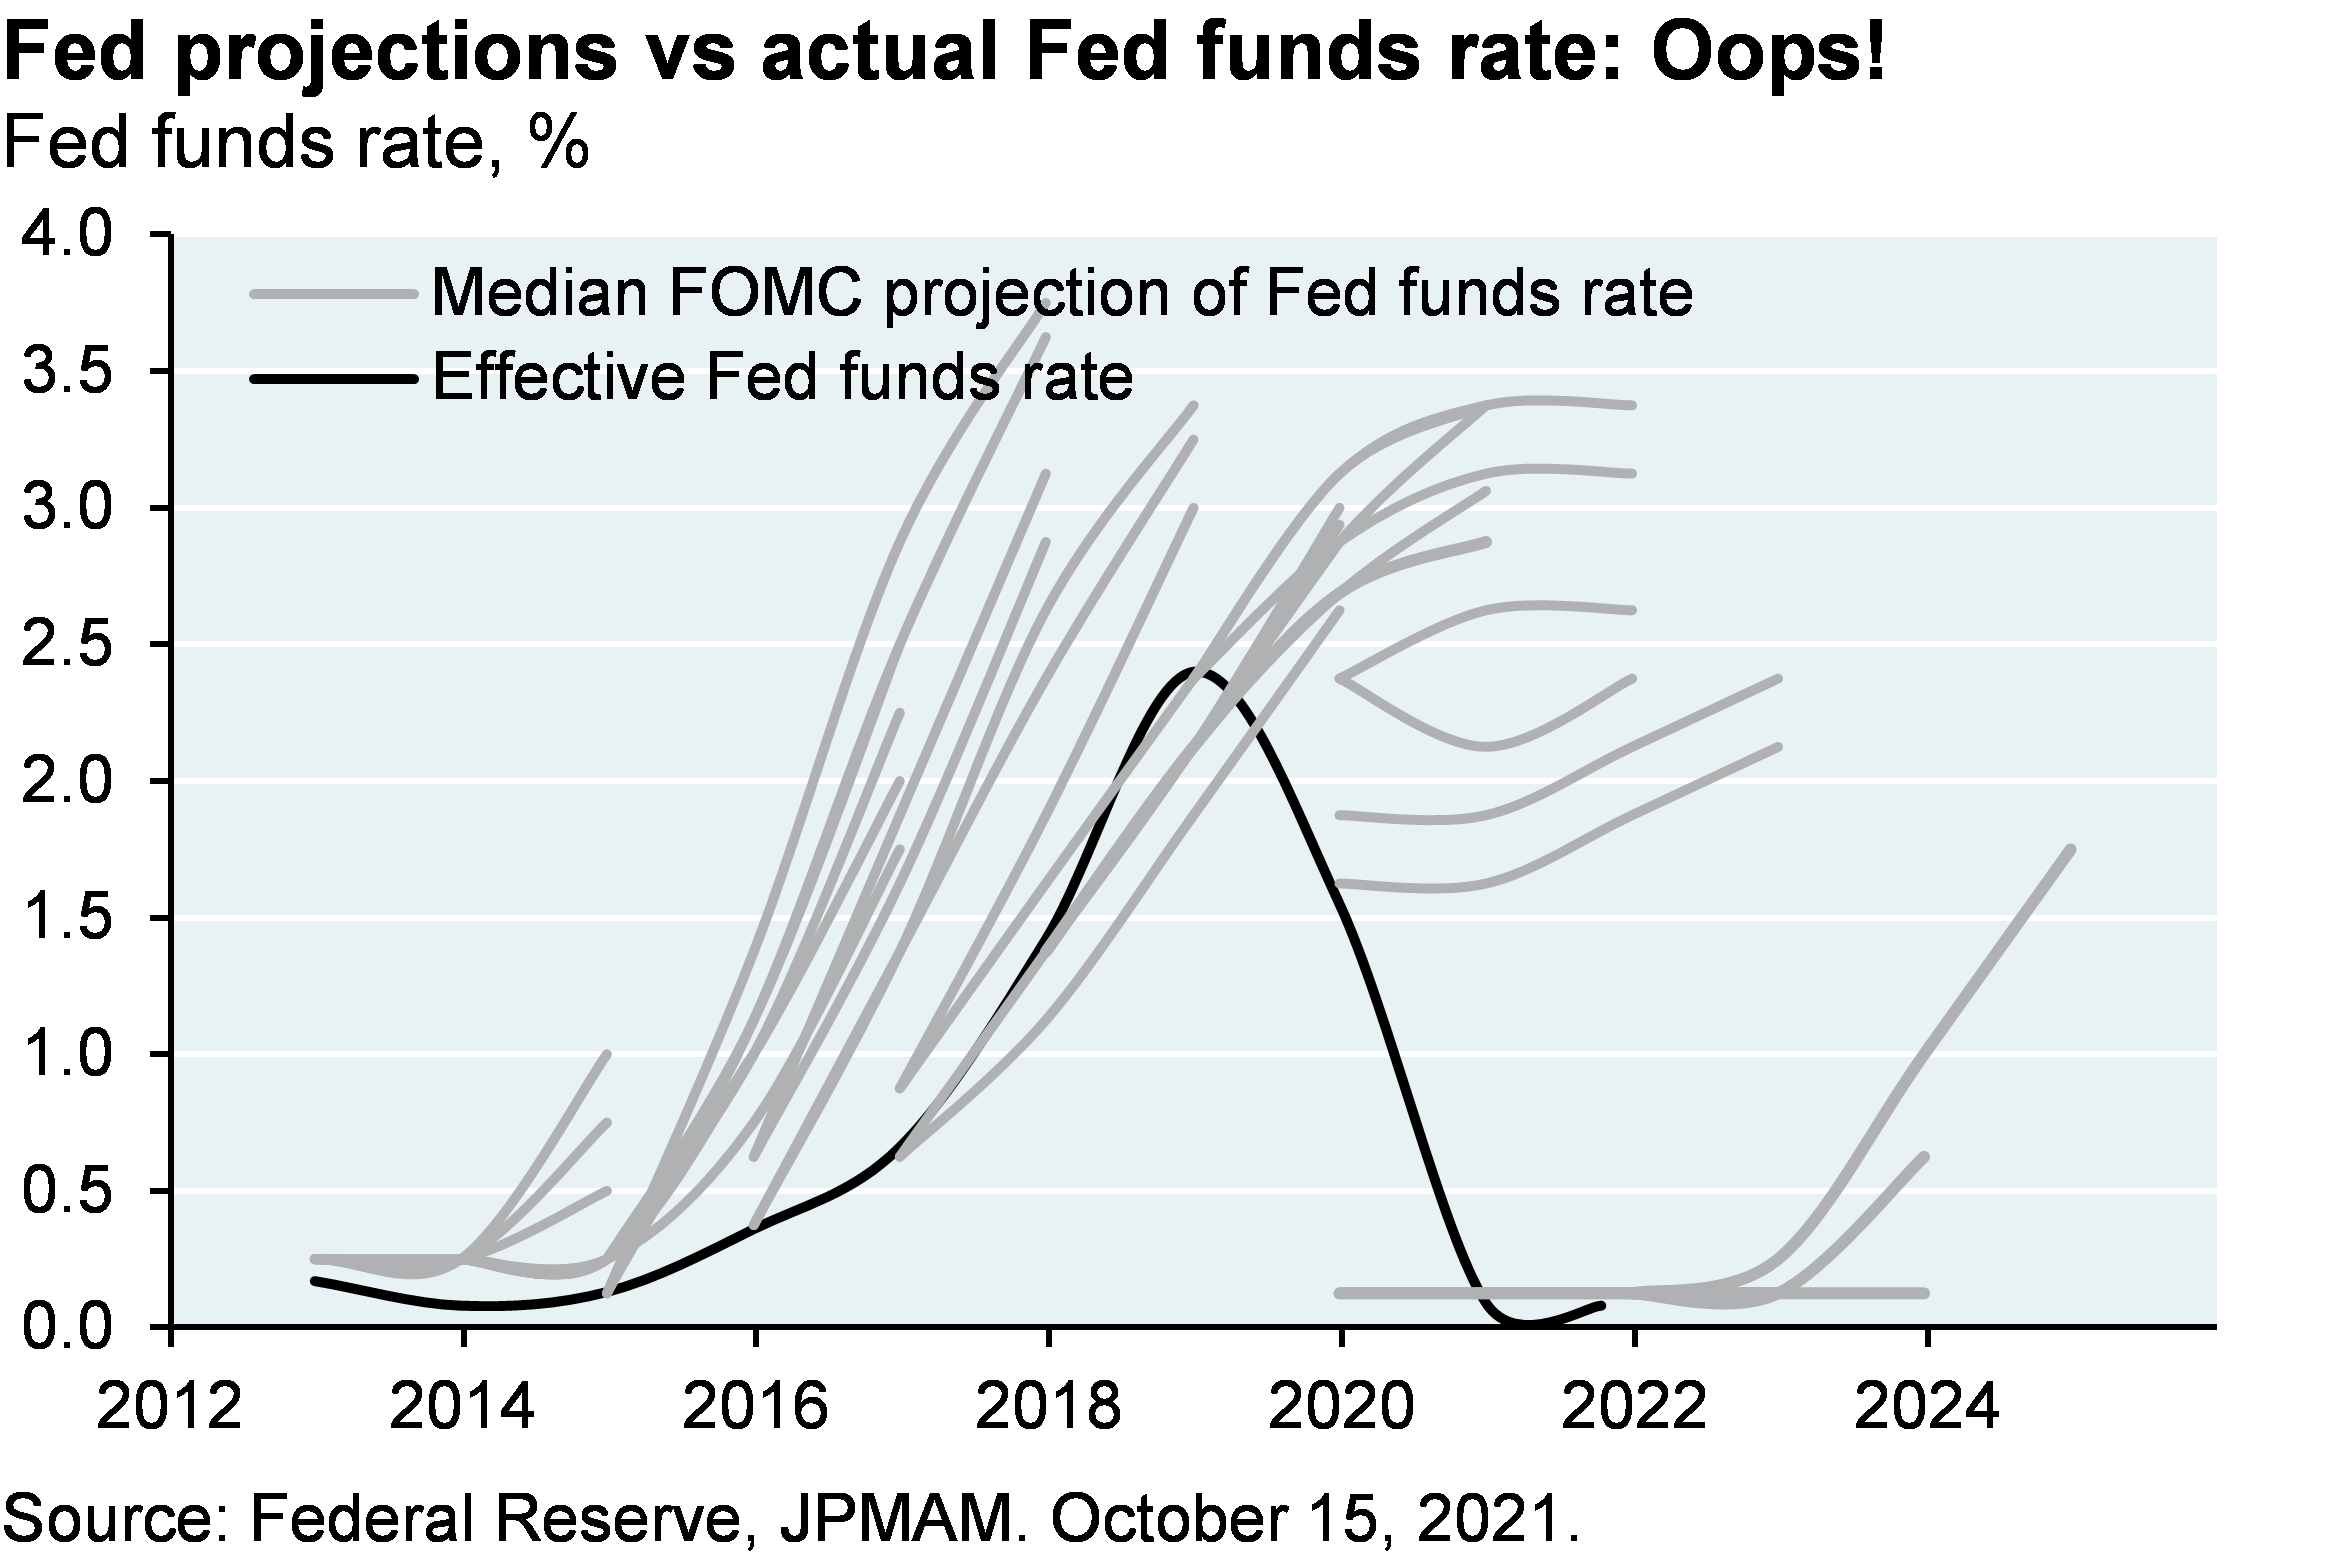 Chart shows the Fed projections vs actual Fed funds rate, shown as two series: the median FOMC projection of the Fed Funds rate (at each FOMC meeting) and a series showing the effective Fed funds rate. The chart shows that the median FOMC projection of the Fed Funds rate has been consistently higher than the effective funds rate since around 2018.